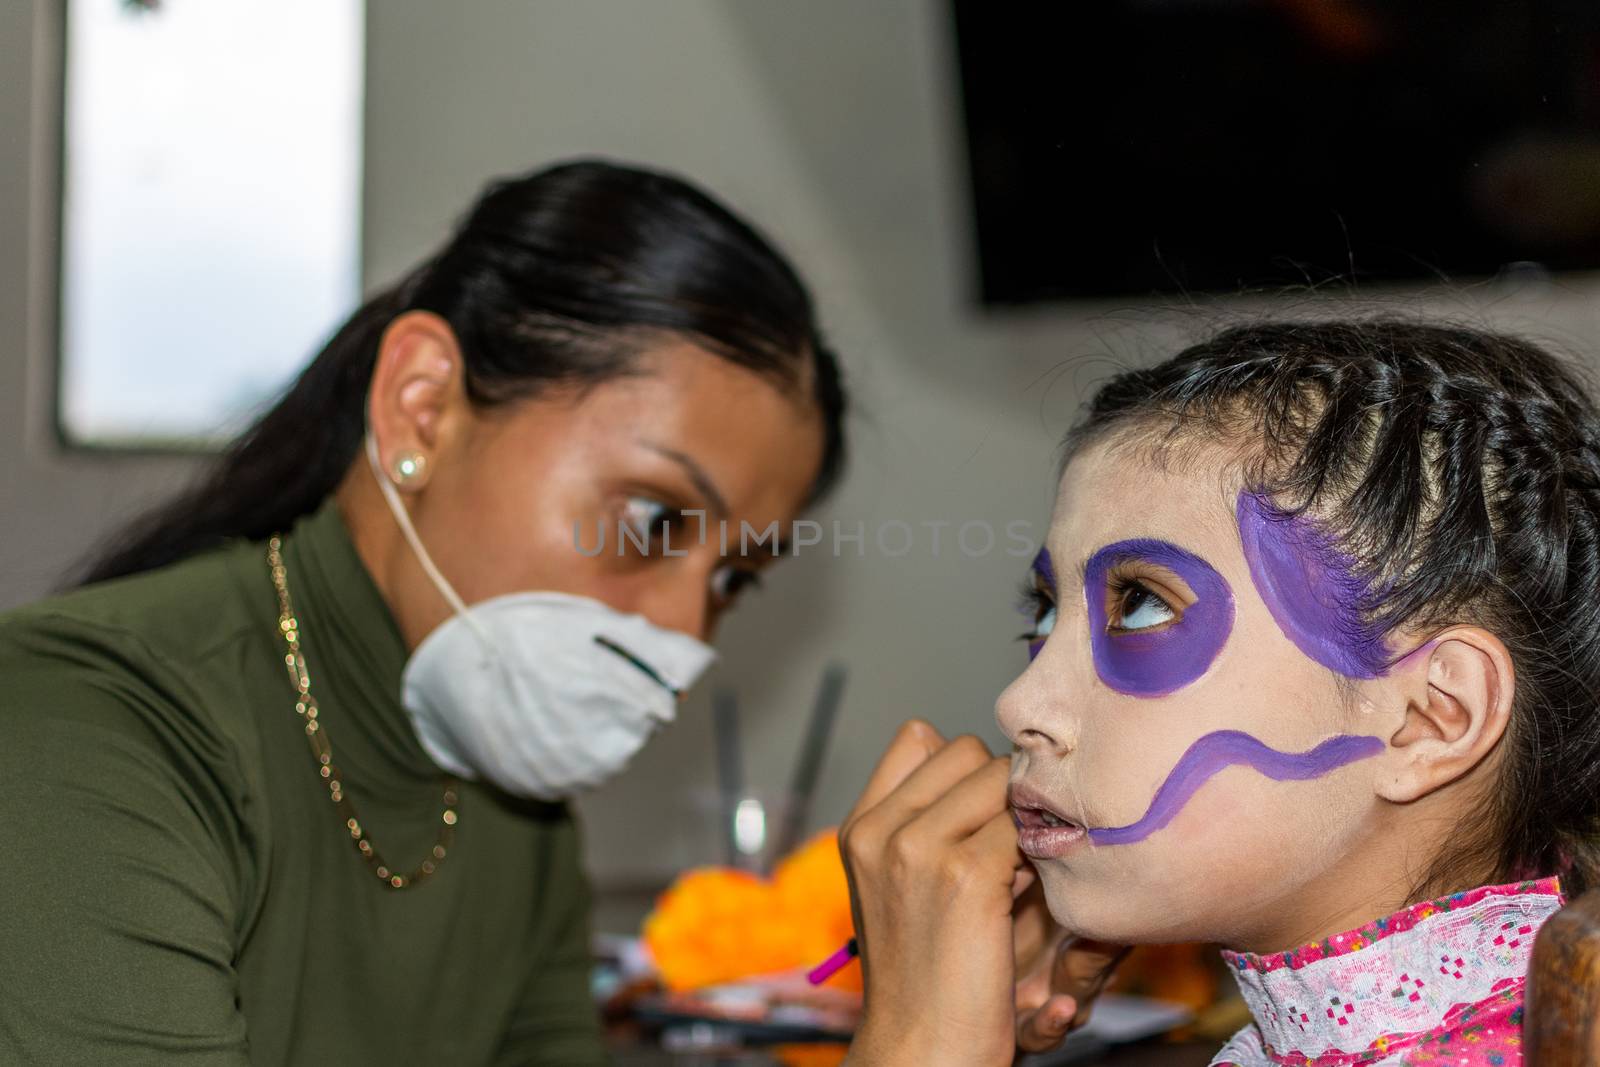 Young woman putting makeup of Catrina in a girl's face by Tonhio